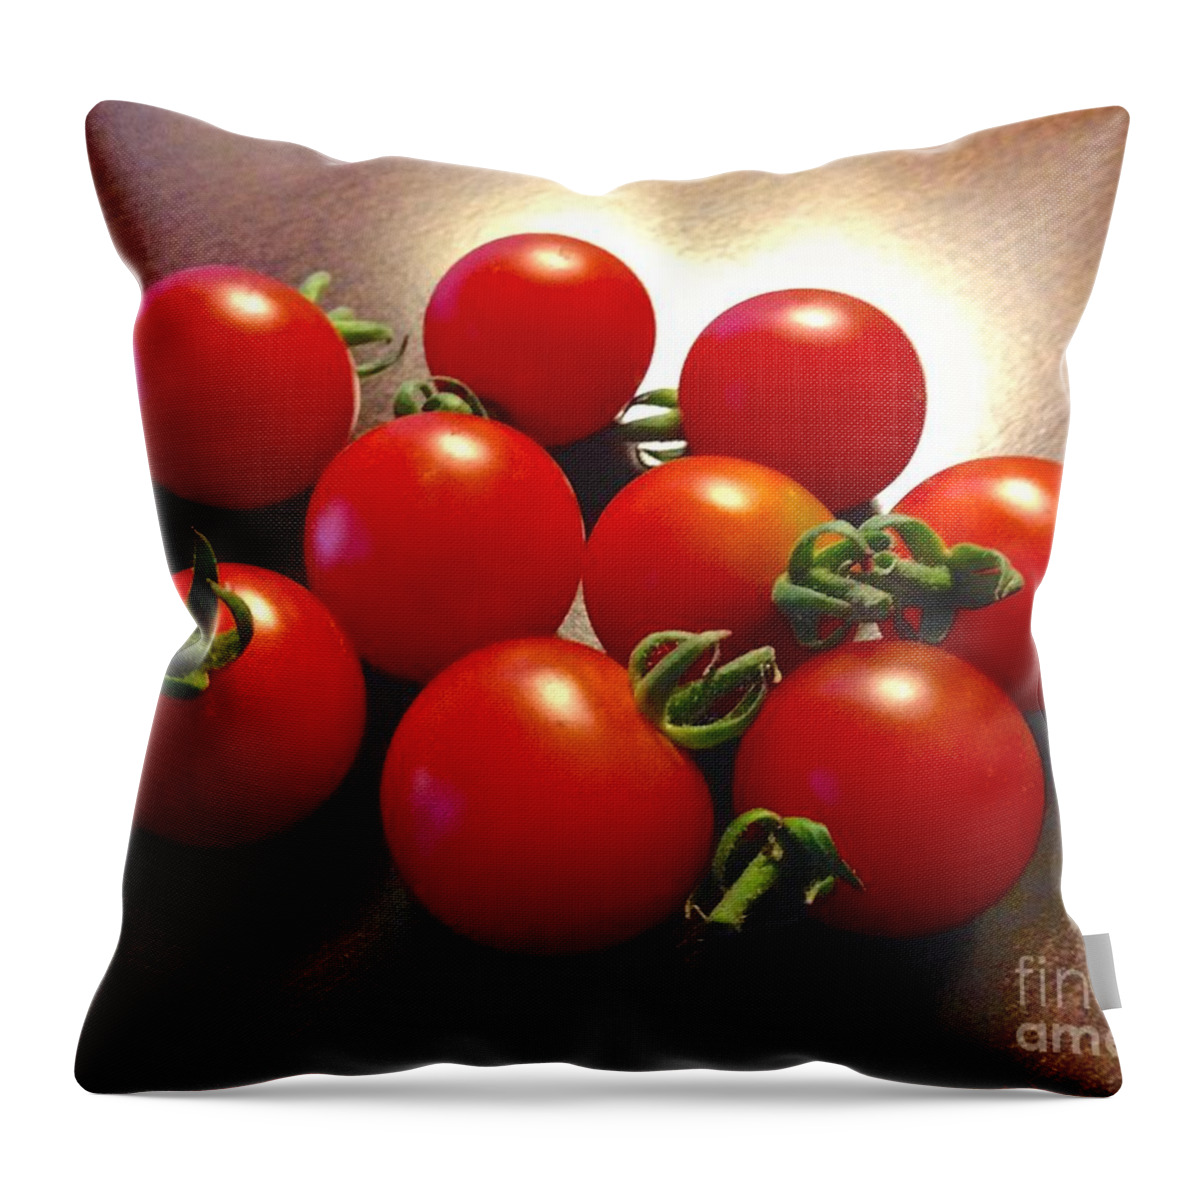 Photography Throw Pillow featuring the photograph Vine Ripe by Sean Griffin